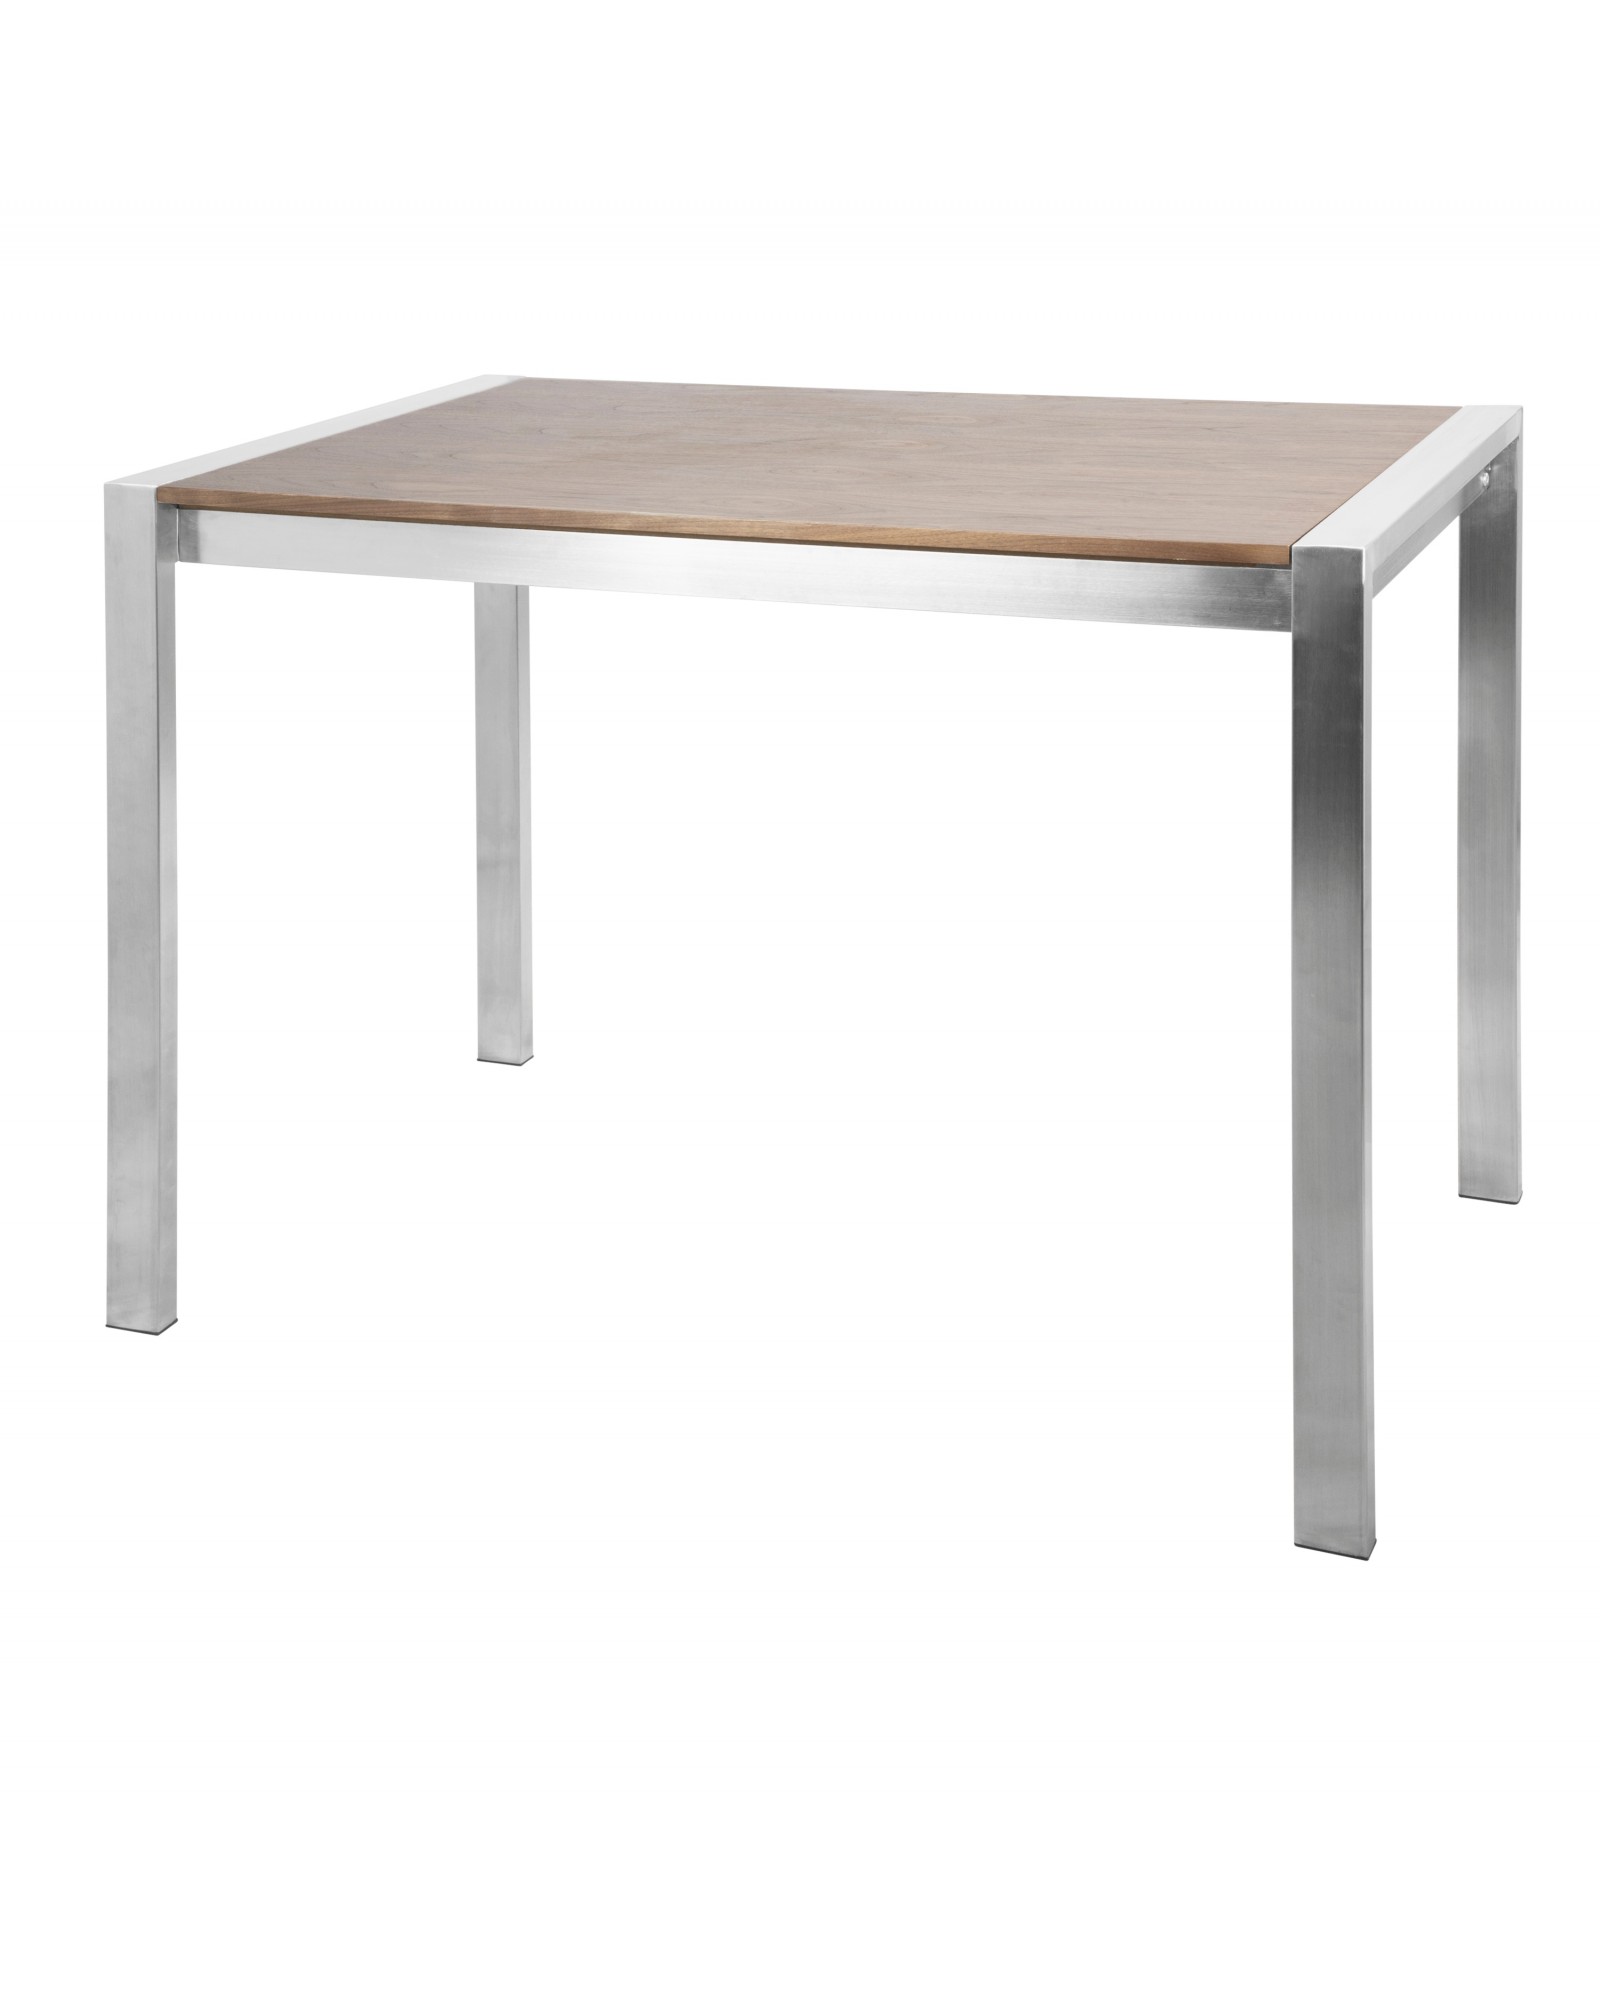 Fuji Contemporary Counter Table in Brushed Stainless Steel and Walnut Wood